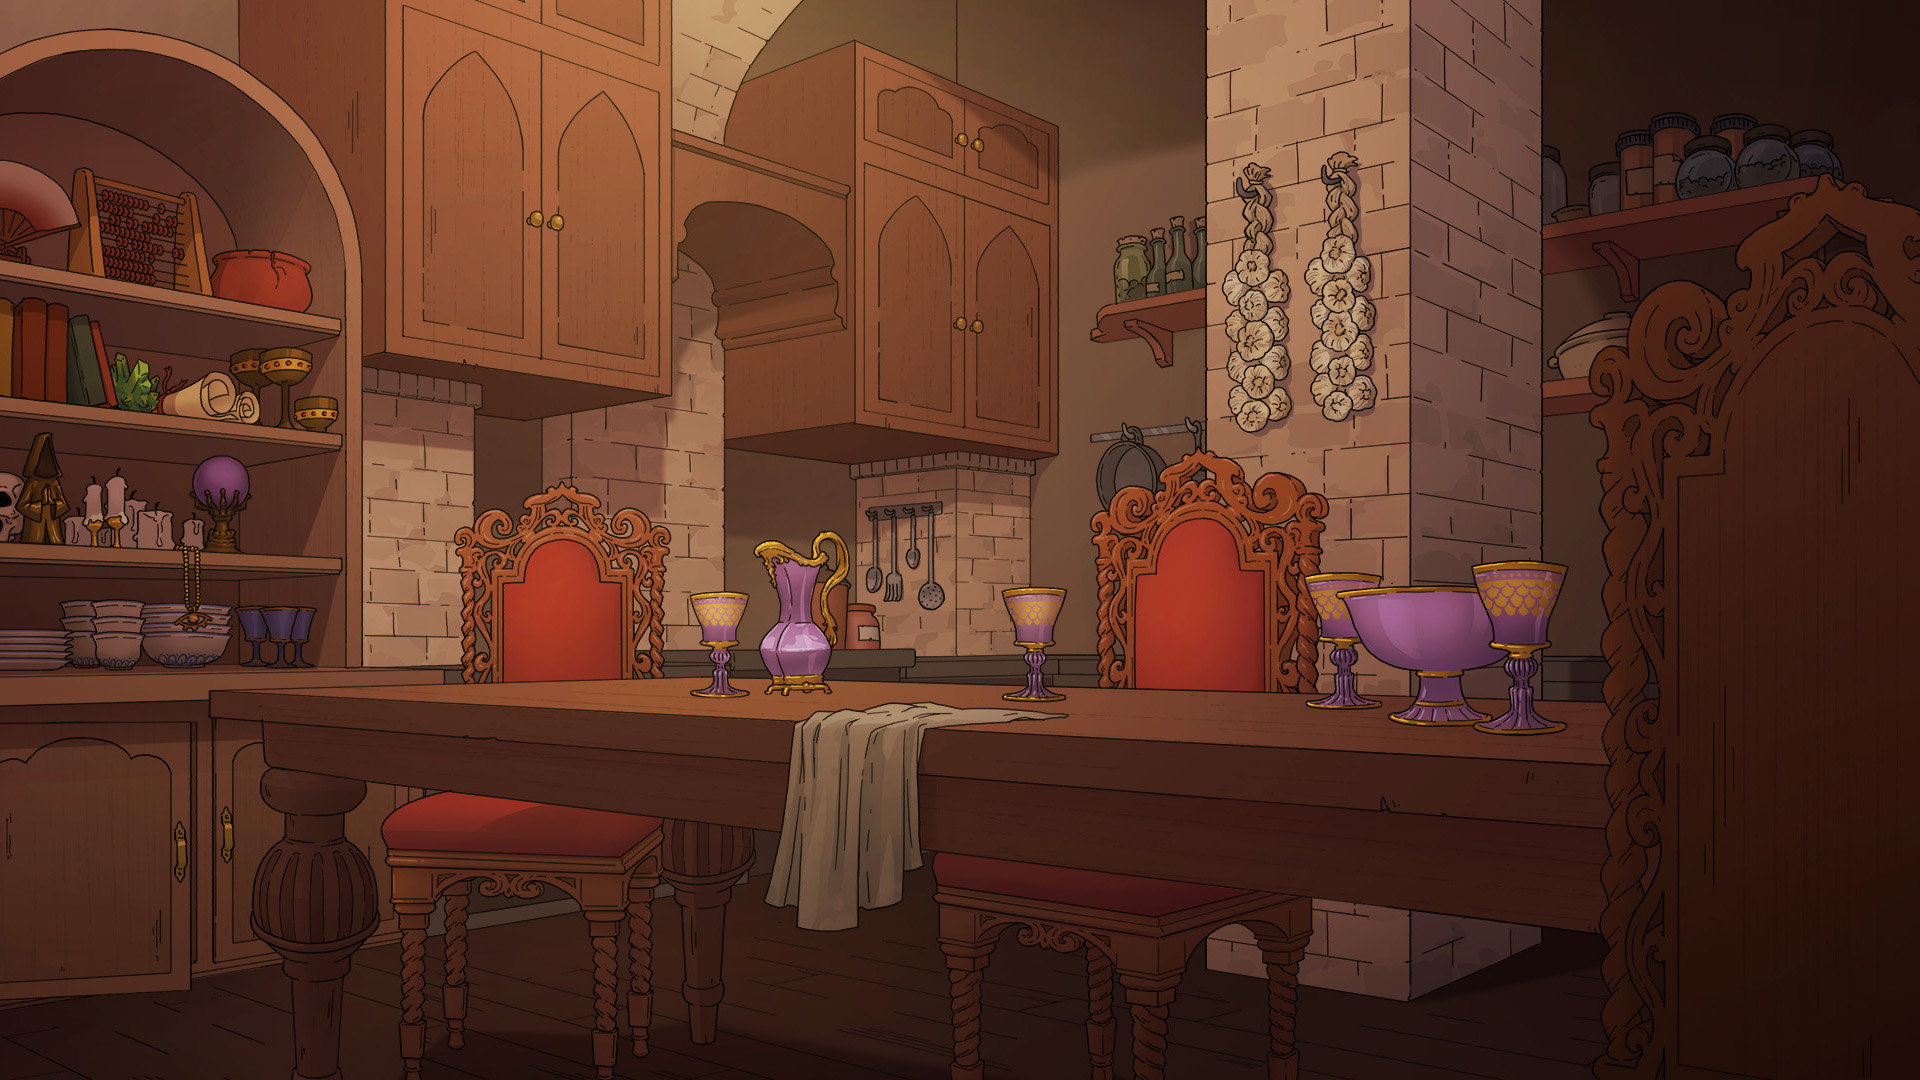 A detailed illustration shows a warmly lit dining table in a kitchen with stone walls and vaulted ceilings. There is expensive-looking purple glassware on the table and a cabinet in the background is filled with a variety of strange and esoteric objects.